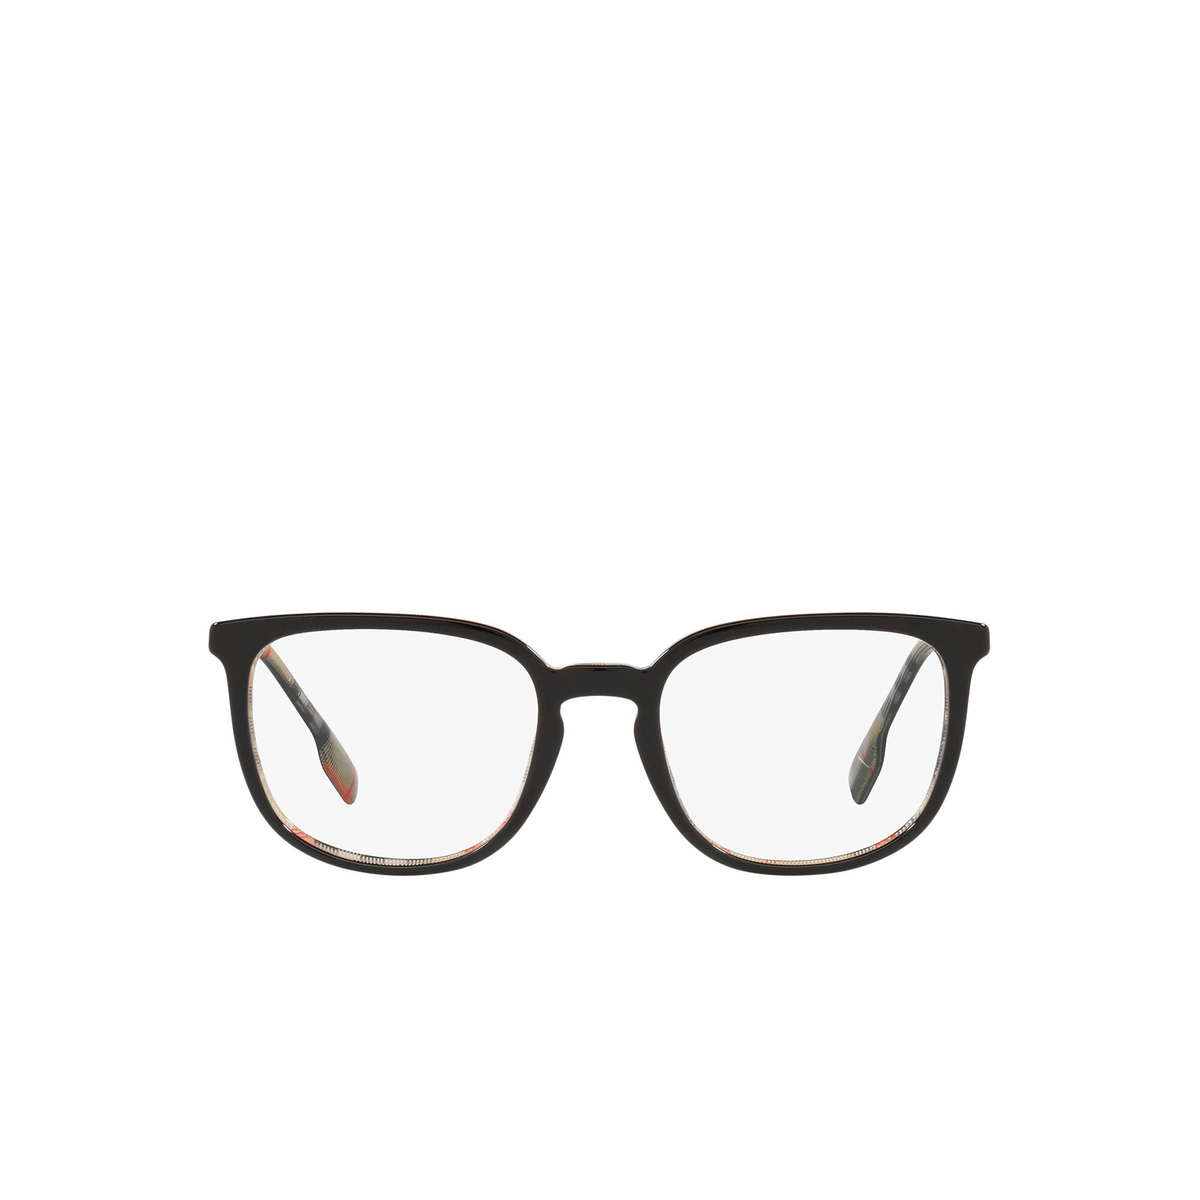 Burberry COMPTON Eyeglasses 3838 Top Black on Vintage Check - front view